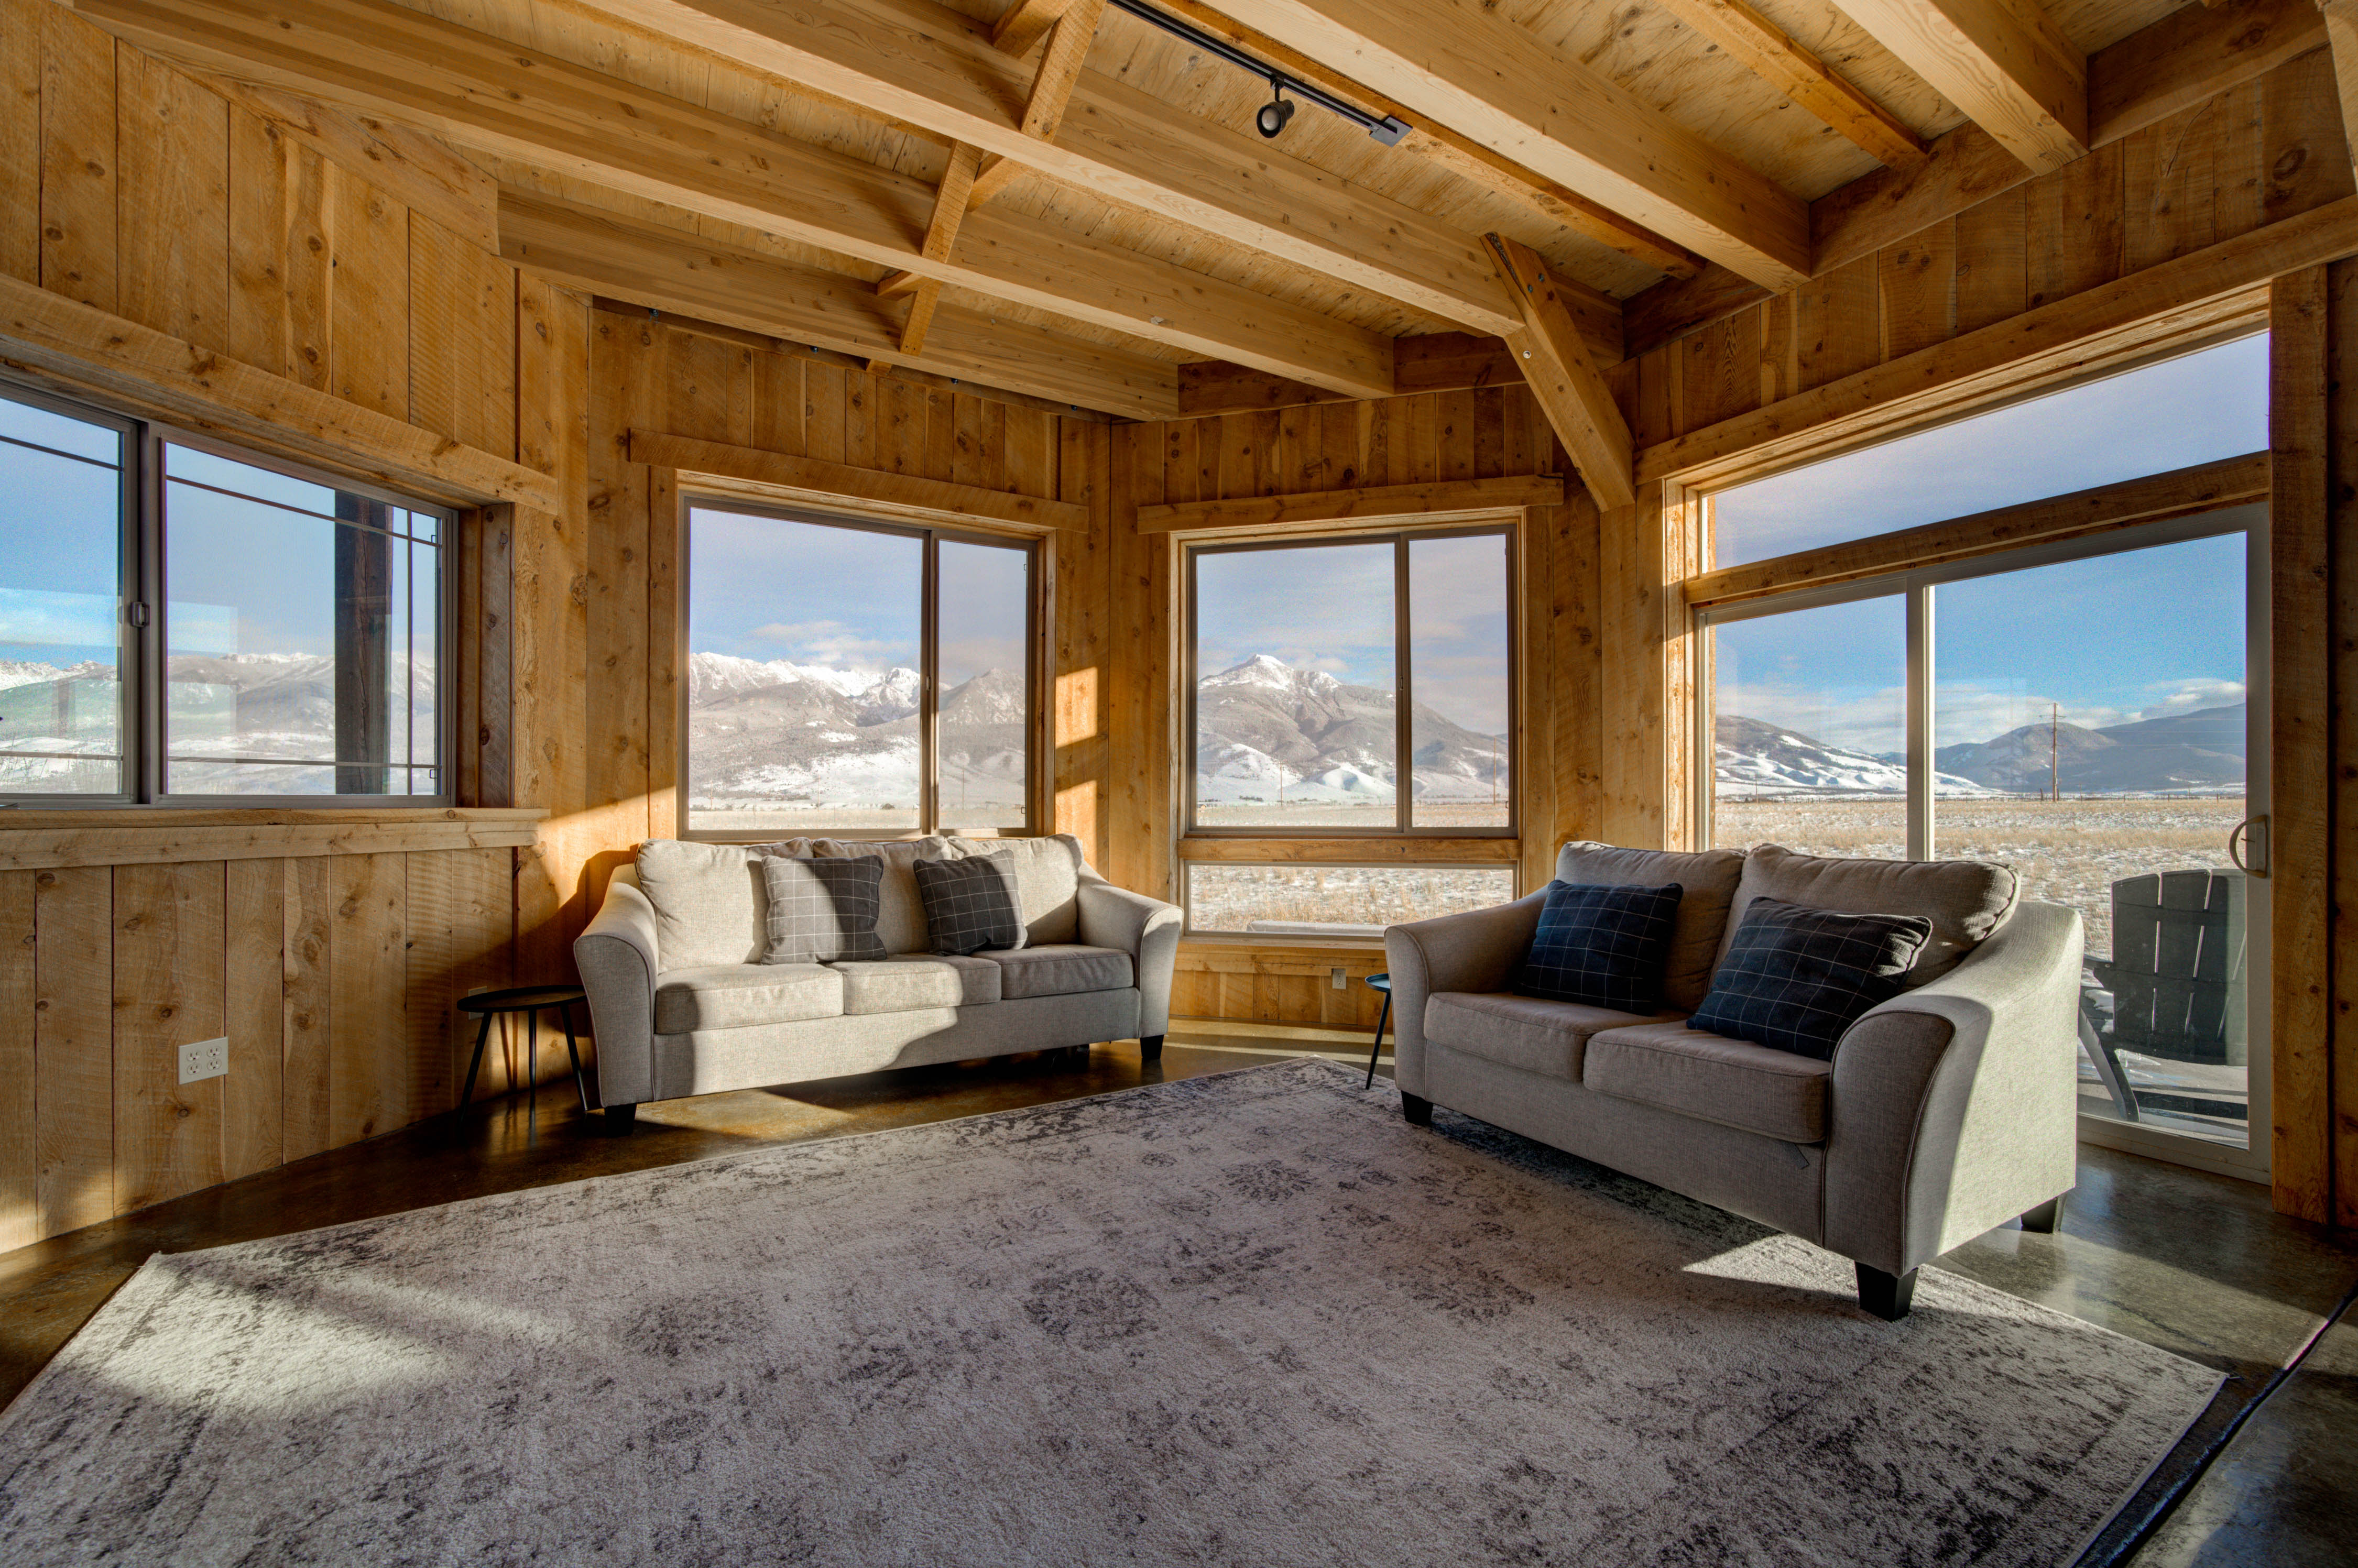 The living room offers stunning views of the valley